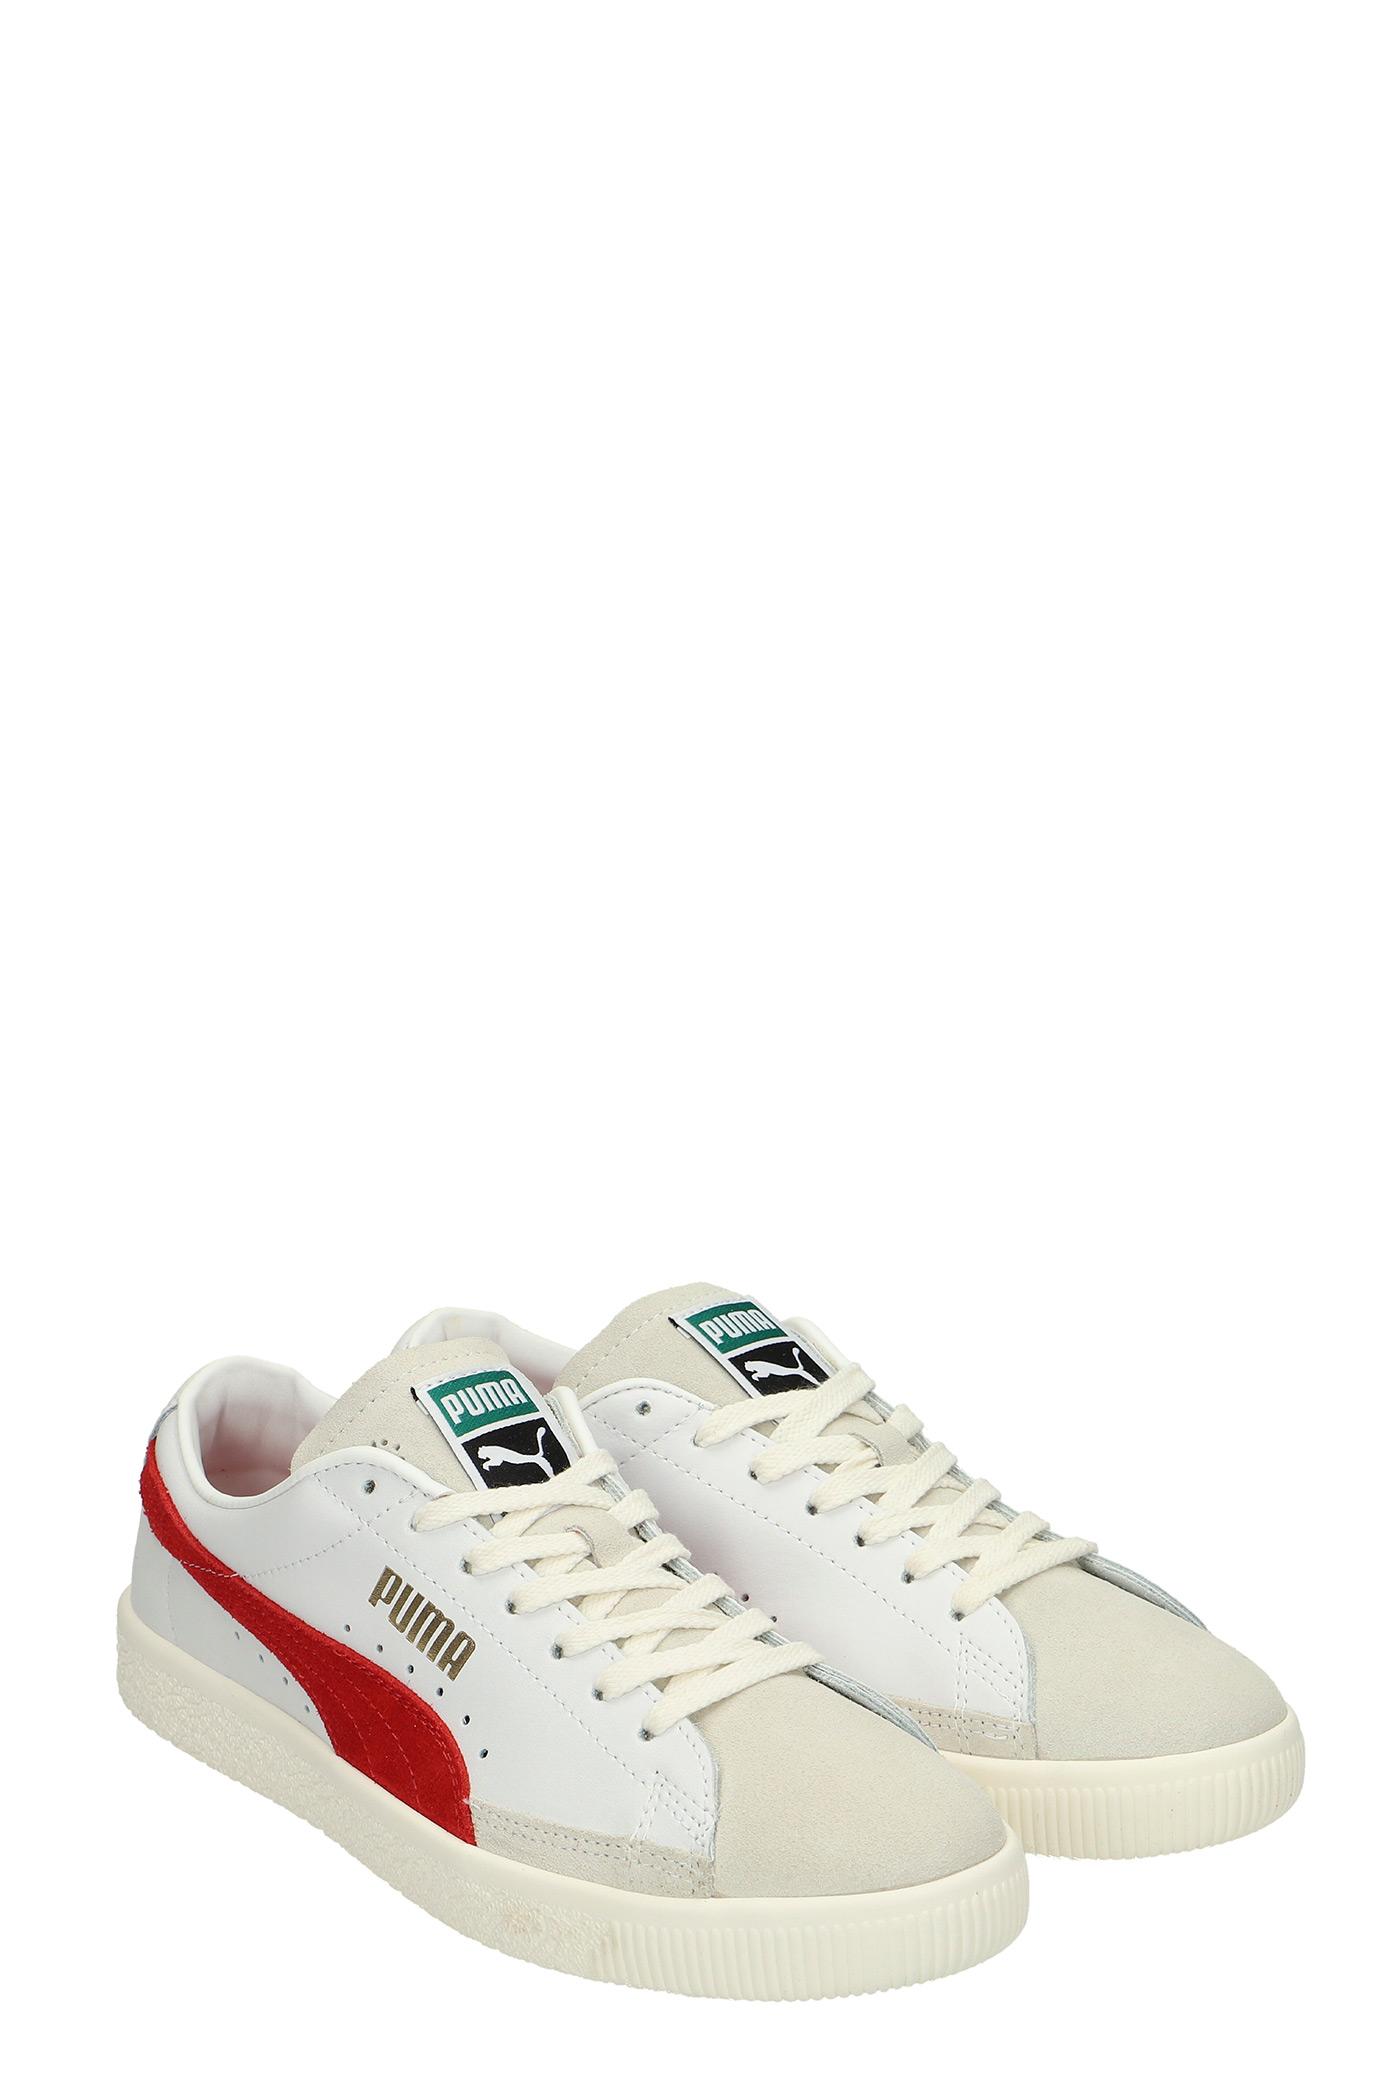 PUMA Basket Vtg Sneakers In White Suede And Leather for Men | Lyst